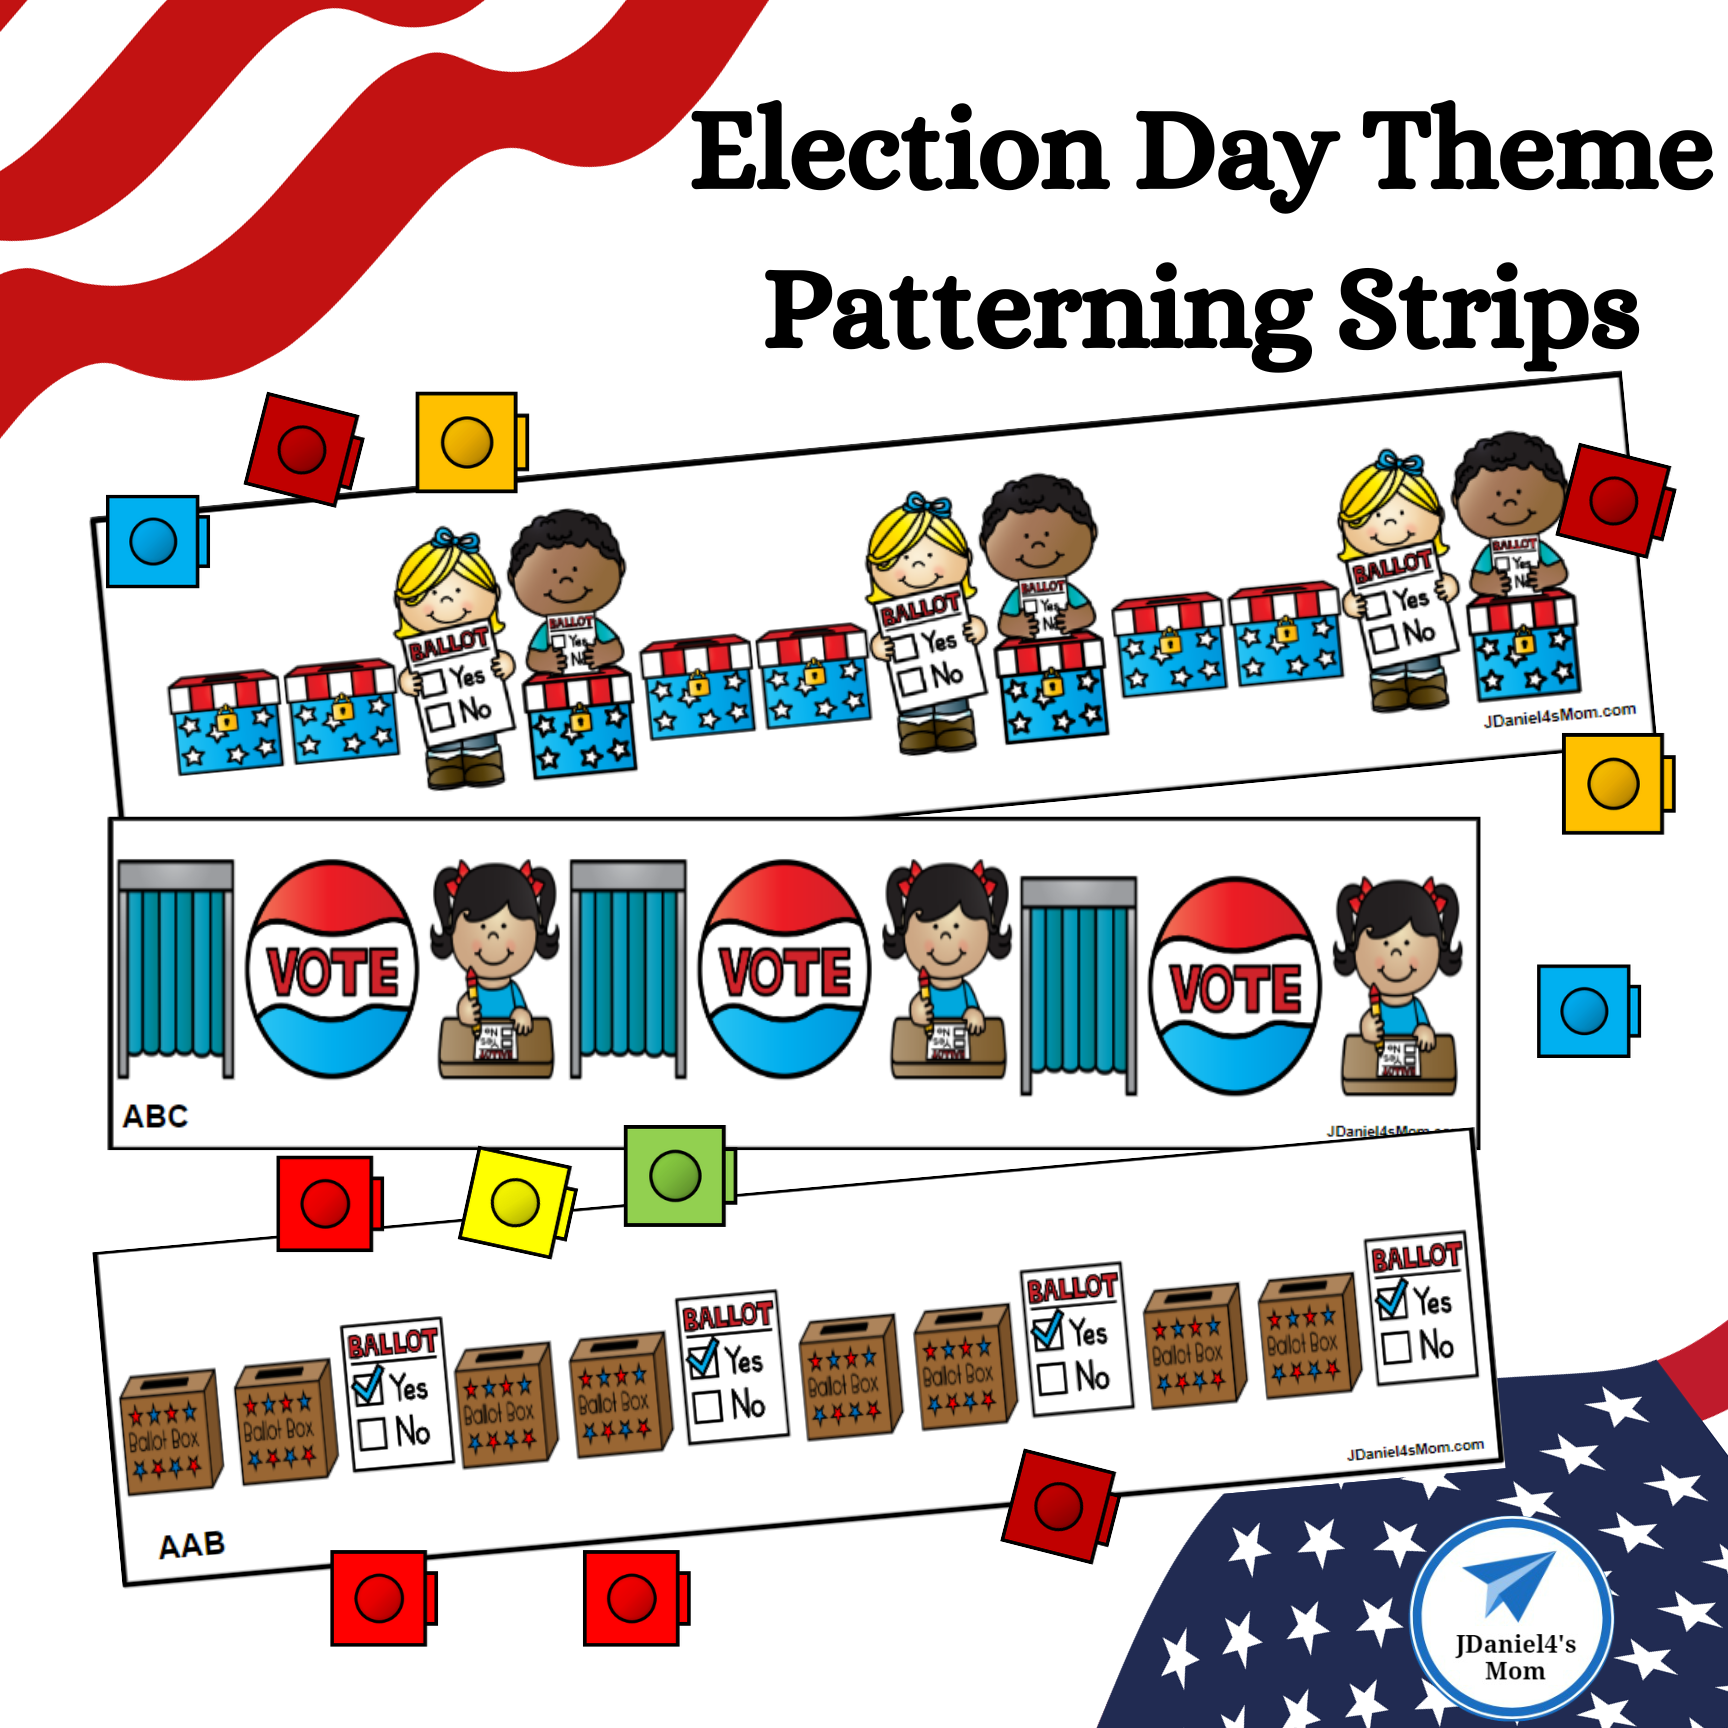 https://jdaniel4smom.com/wp-content/uploads/Election-Day-Theme-Patterning-Strips-24-x-24-in-1.png